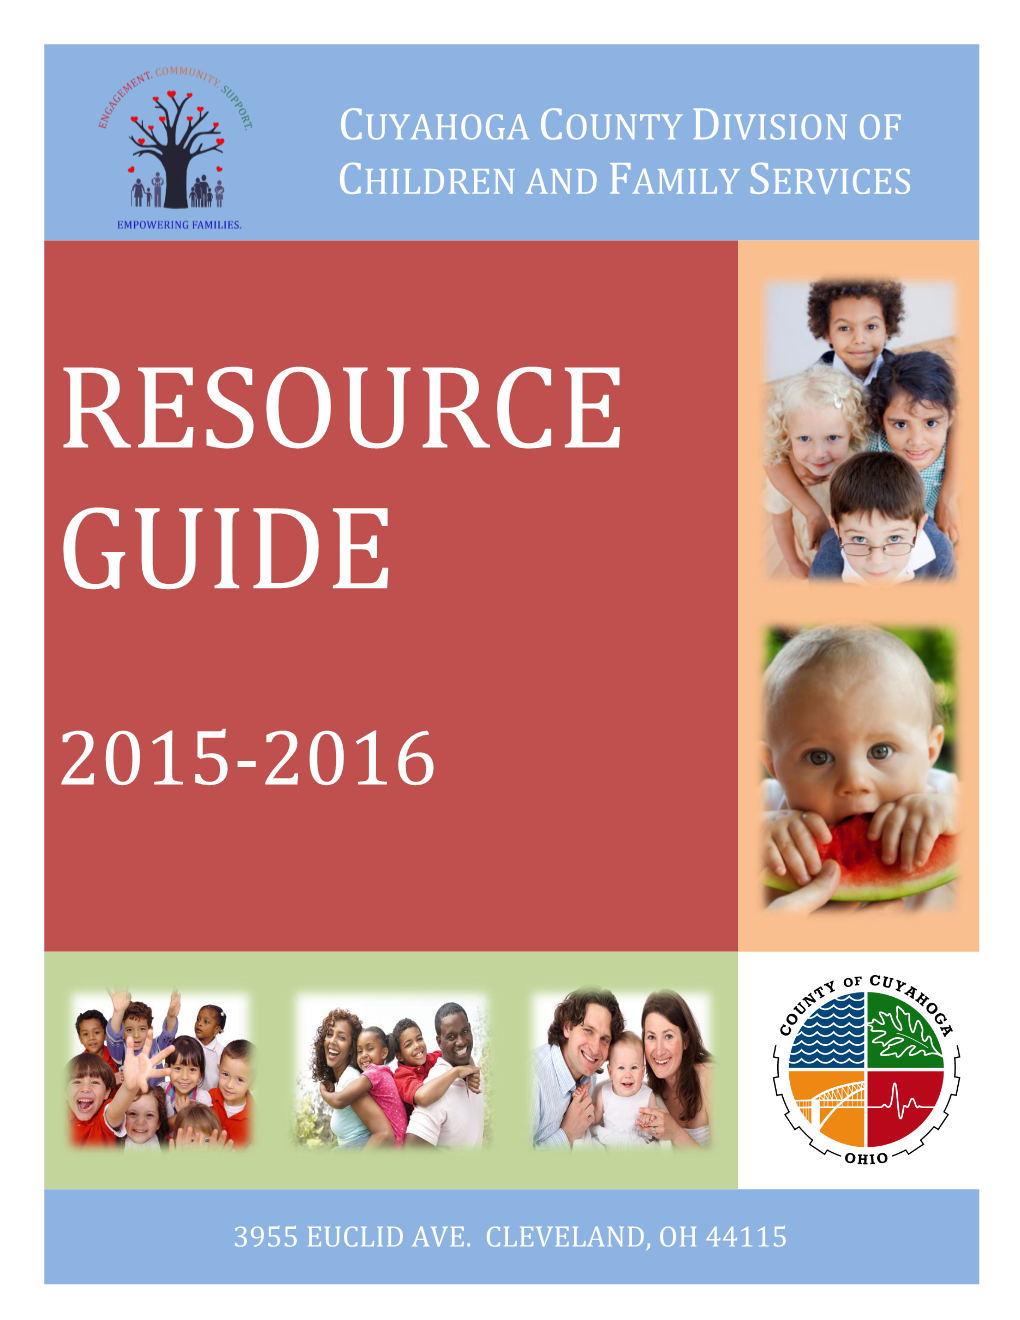 Cuyahoga County Resource Guide 2015-2016